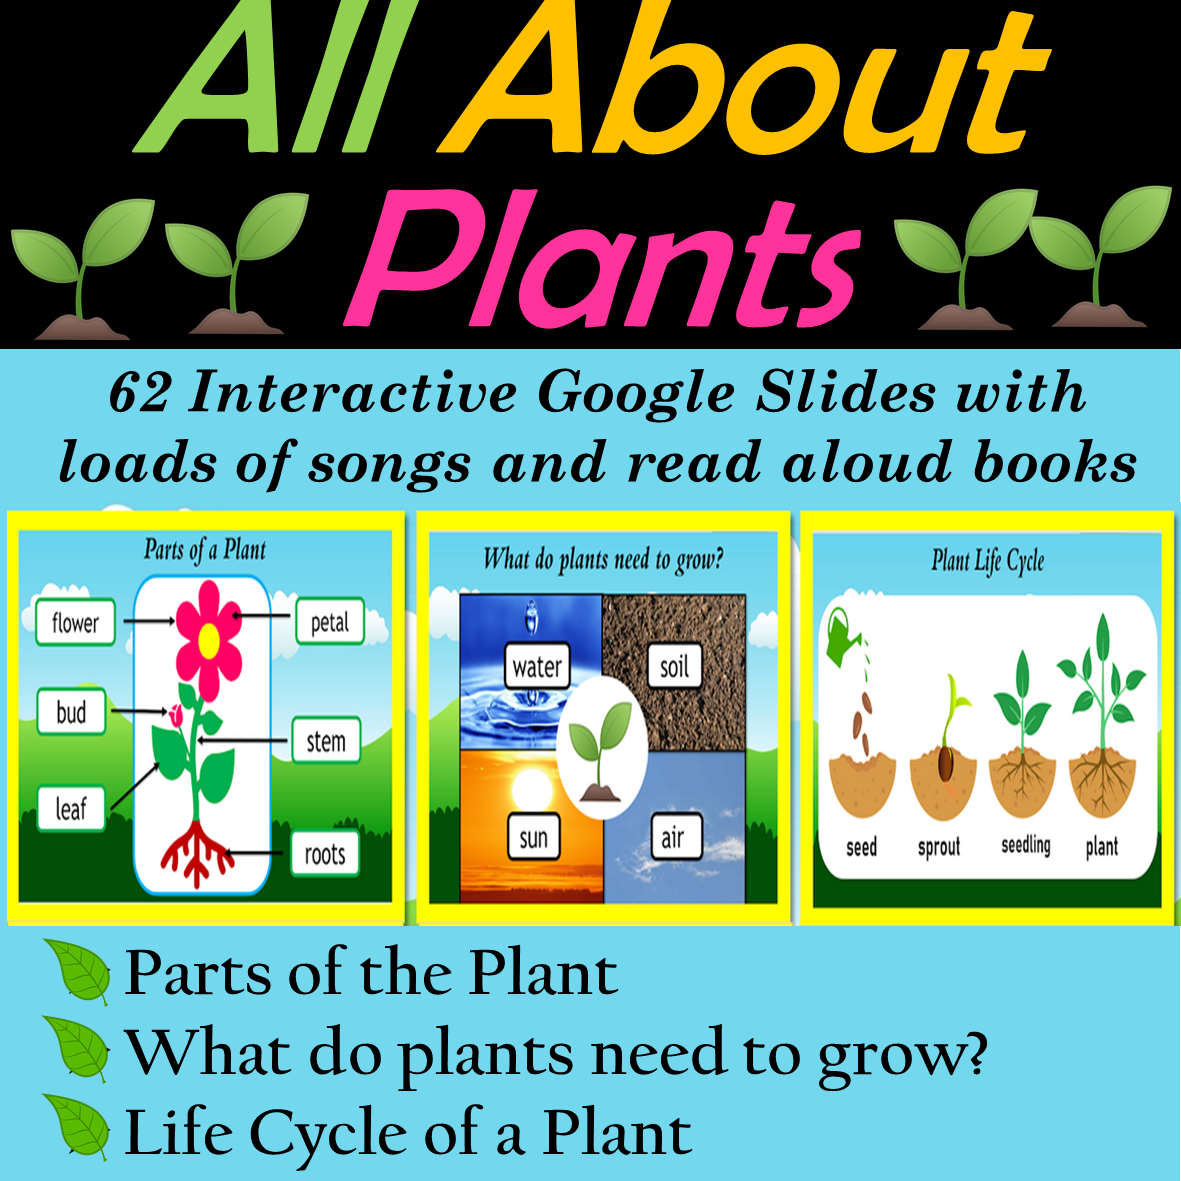 Digital All About Plants, Plant Life Cycle, Parts of a Plant- 62 Google Slides